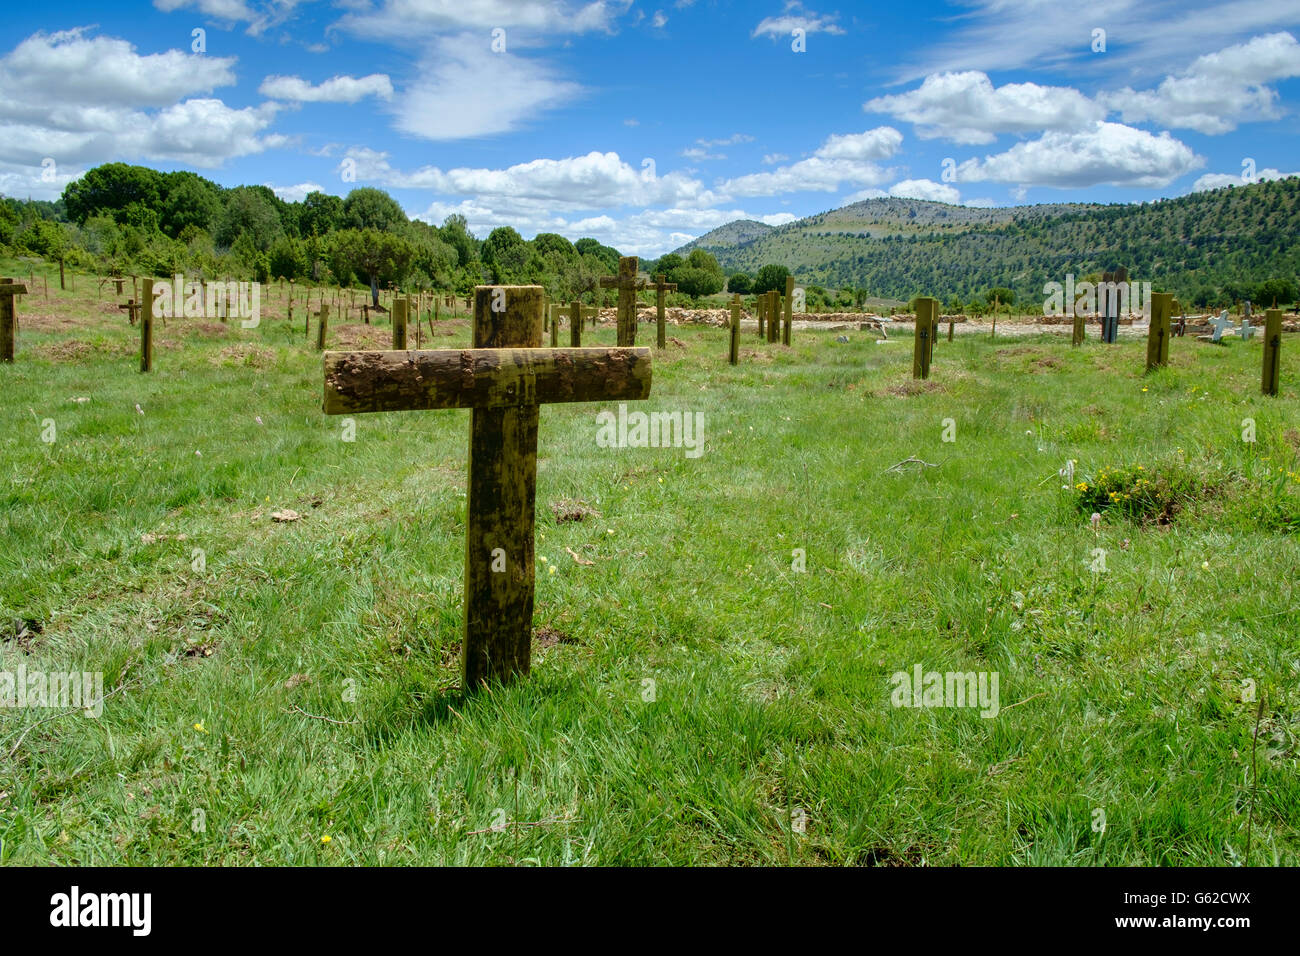 Sad Hill Cemetery - dargestellt in dem Film "The Good, the Bad and the Ugly" - in der Nähe von Covarrubias in Spanien Stockfoto